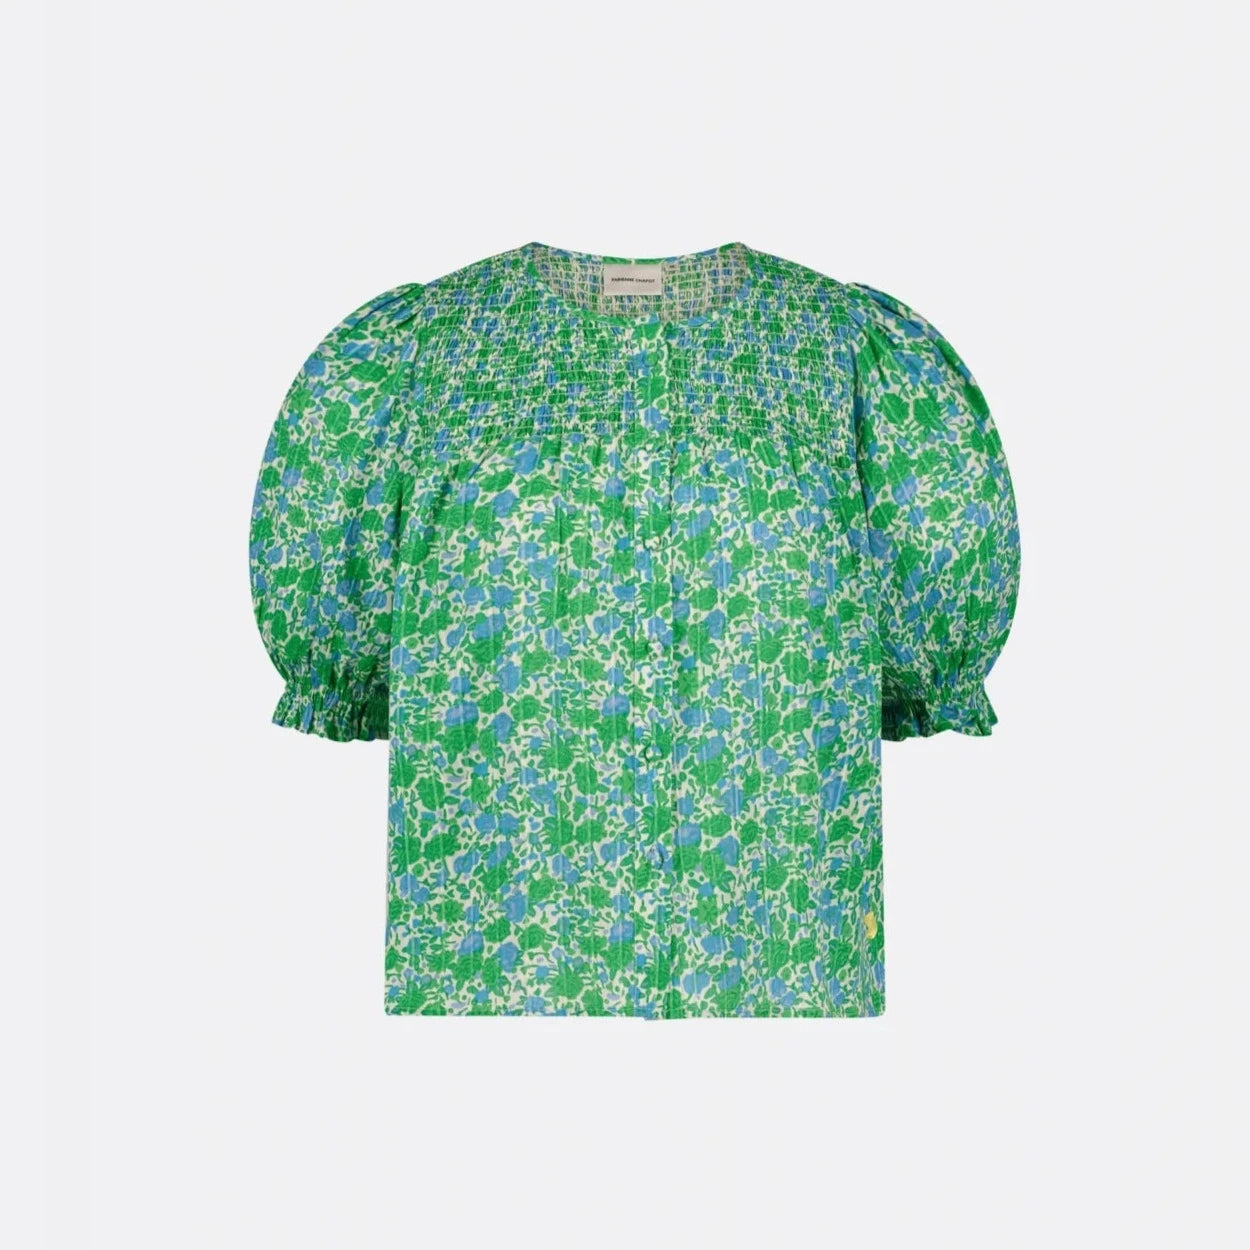 June Short Sleeve Organic Top - Green Clueless by Fabienne Chapot displayed on a white background.